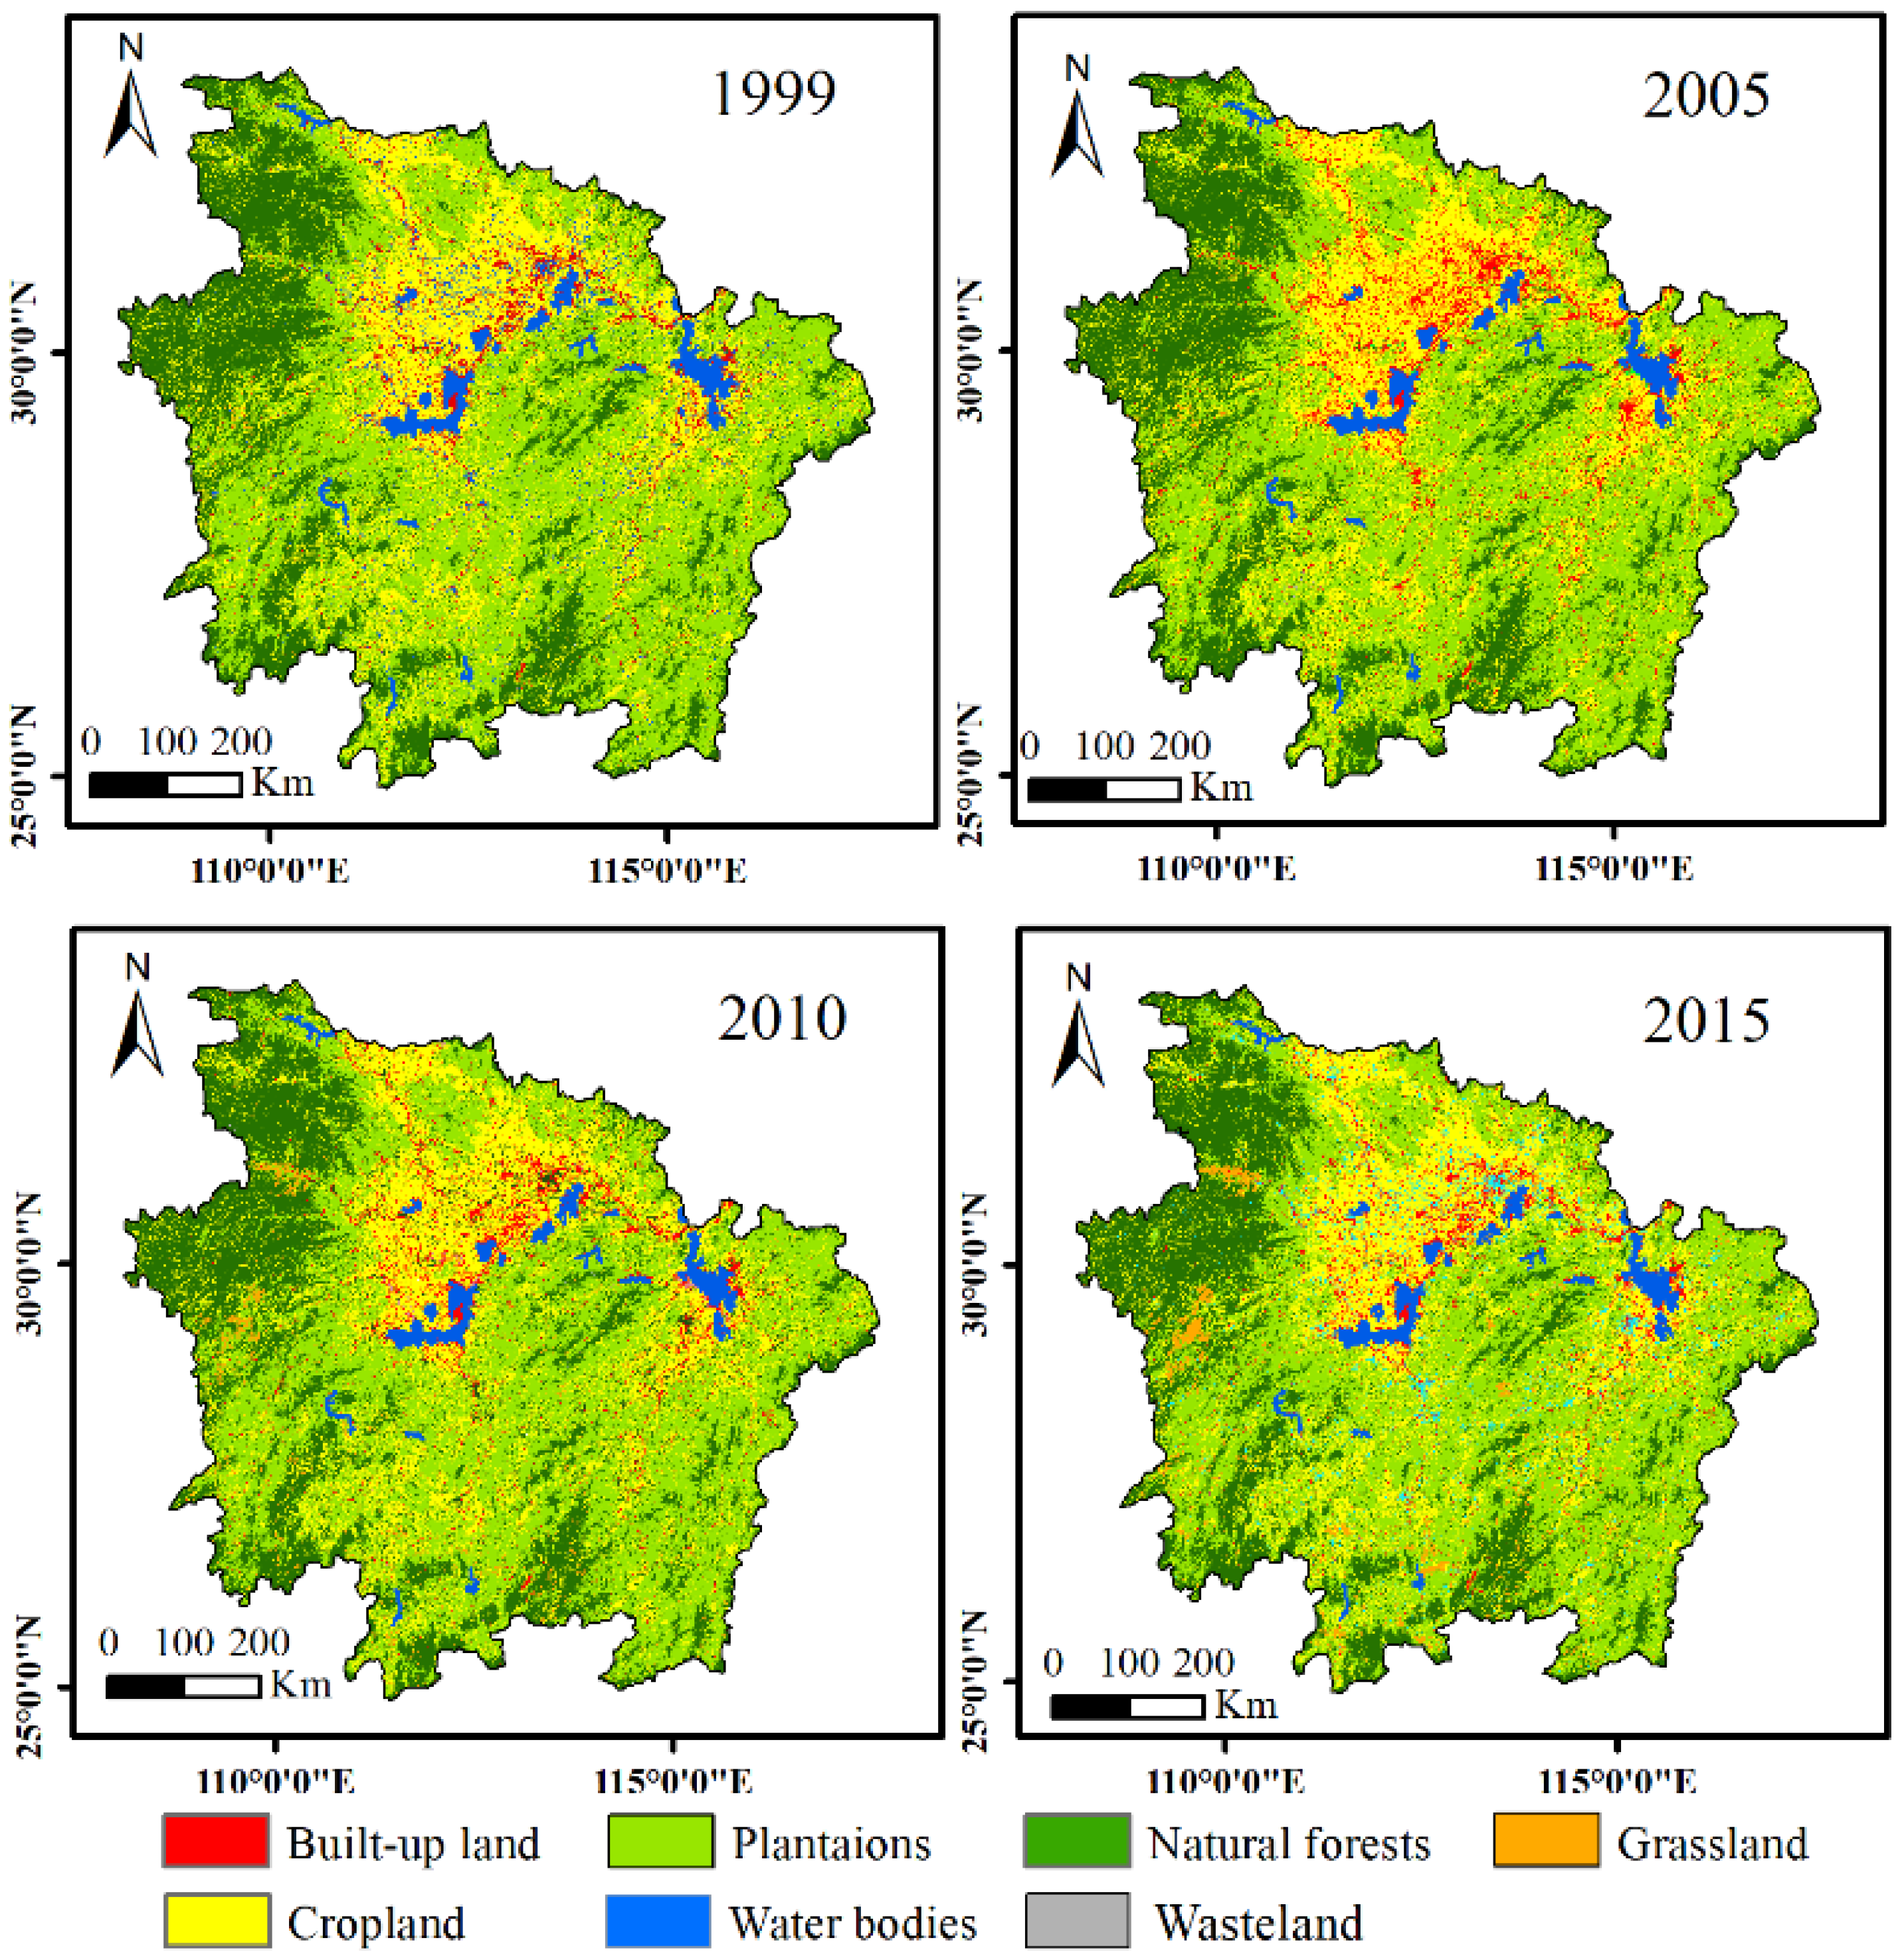 Forests | Free Full-Text | Dynamic Changes of Plantations and Natural  Forests in the Middle Reaches of the Yangtze River and Their Relationship  with Climatic Factors | HTML